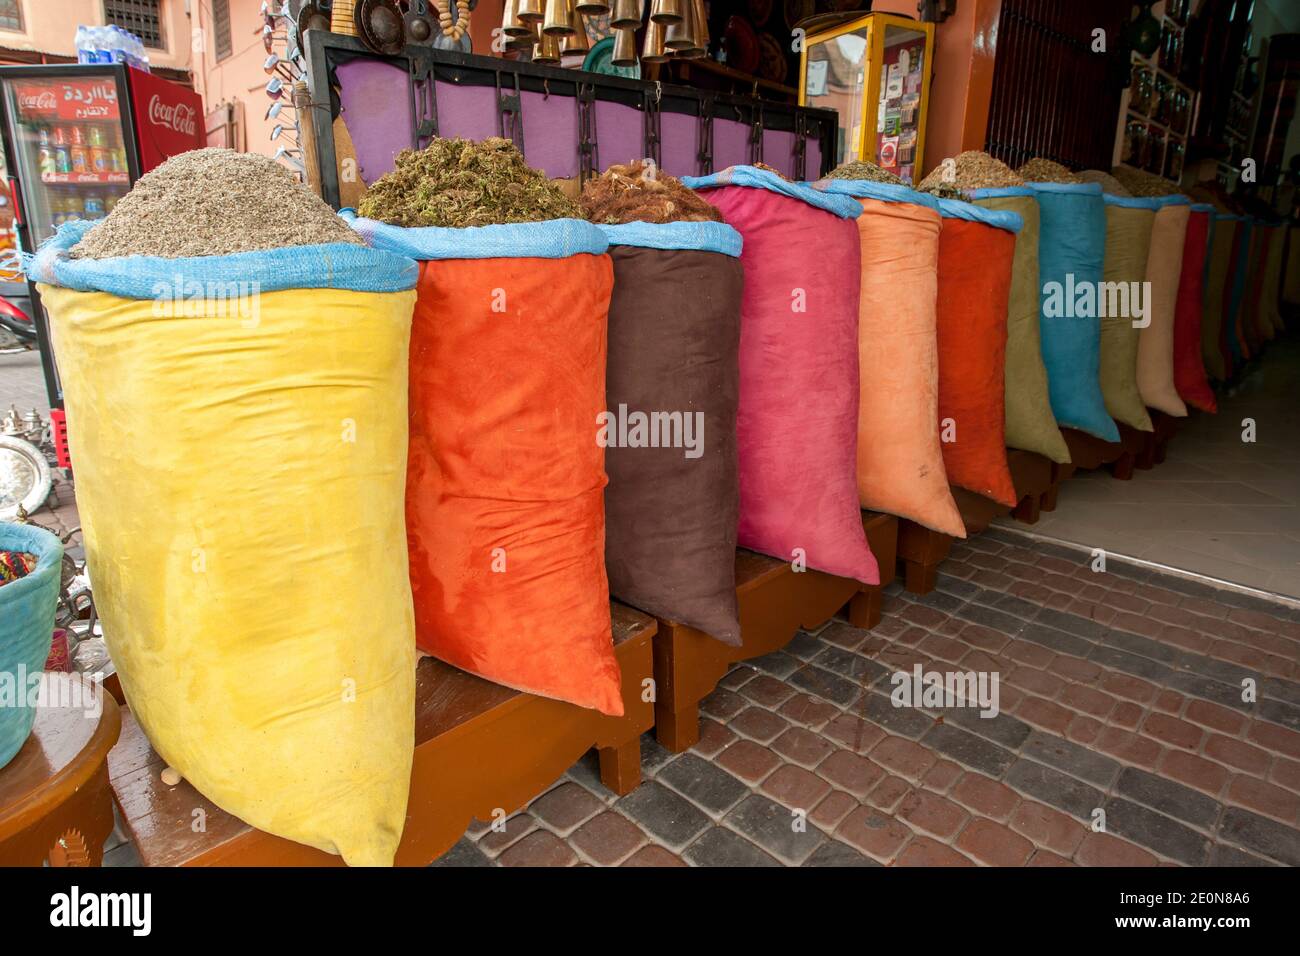 A colourful display of sacks containing various grains, herbs and spices for sale in the Marrakesh medina, Morocco. Marrakesh was founded in 1062. Stock Photo